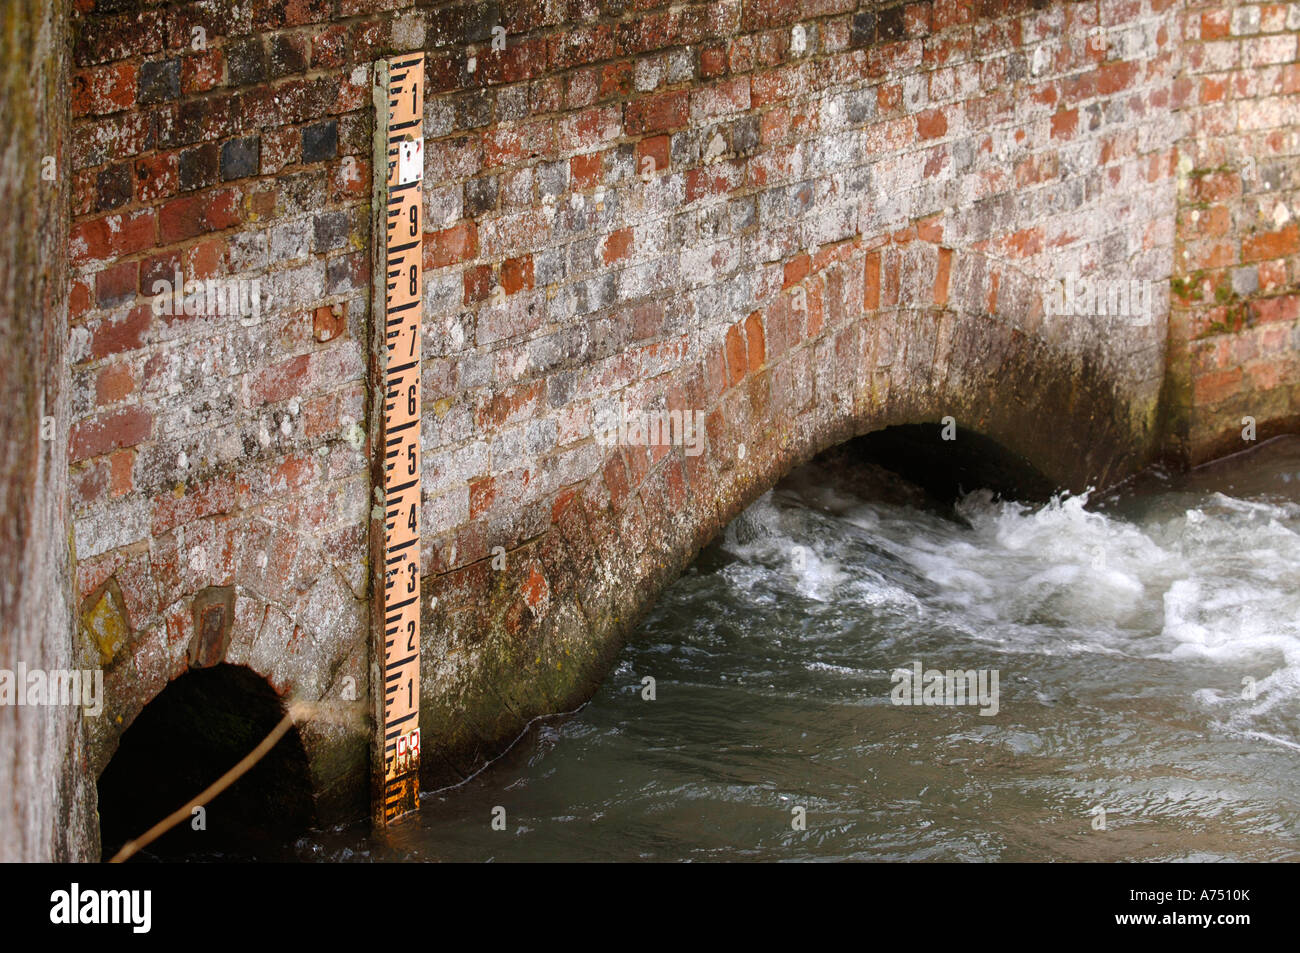 HIGH RIVER LEVELS ON THE RIVER KENNET AT LOWER DENFORD NEAR HUNGERFORD UK Stock Photo